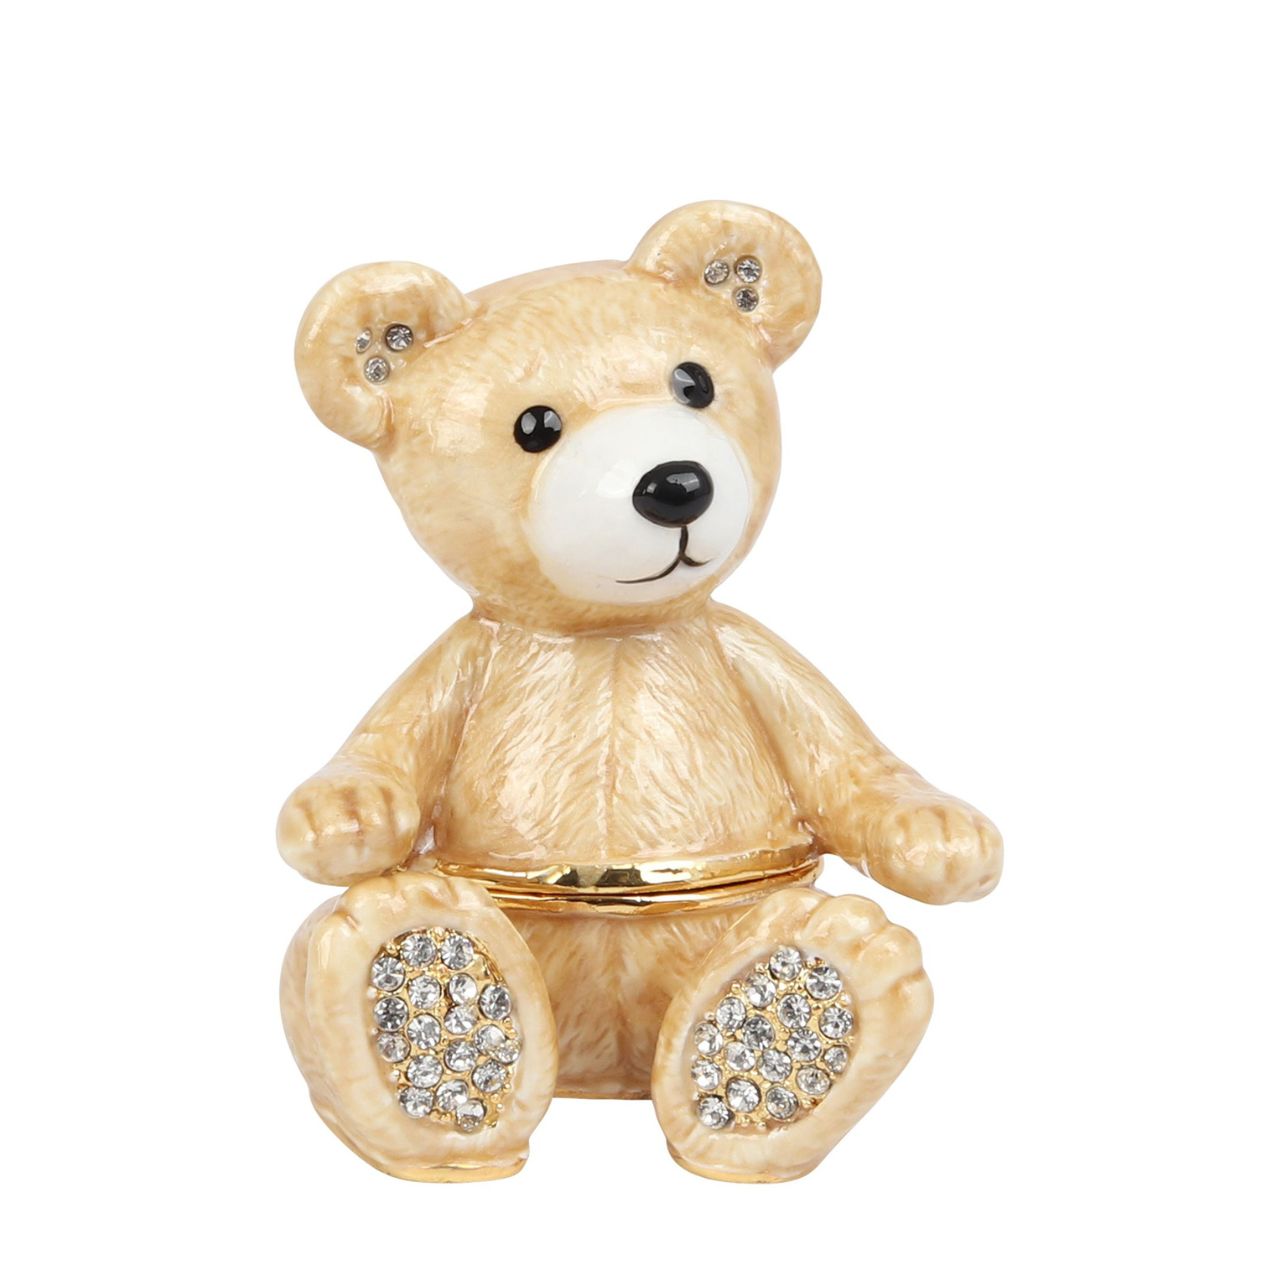 Treasured Trinkets - Teddy Bear  A beautiful, die-cast crystal set teddy bear trinket box. From Treasured Trinkets by STRATTON® - hand painted, collectable trinkets to be treasured for a lifetime.